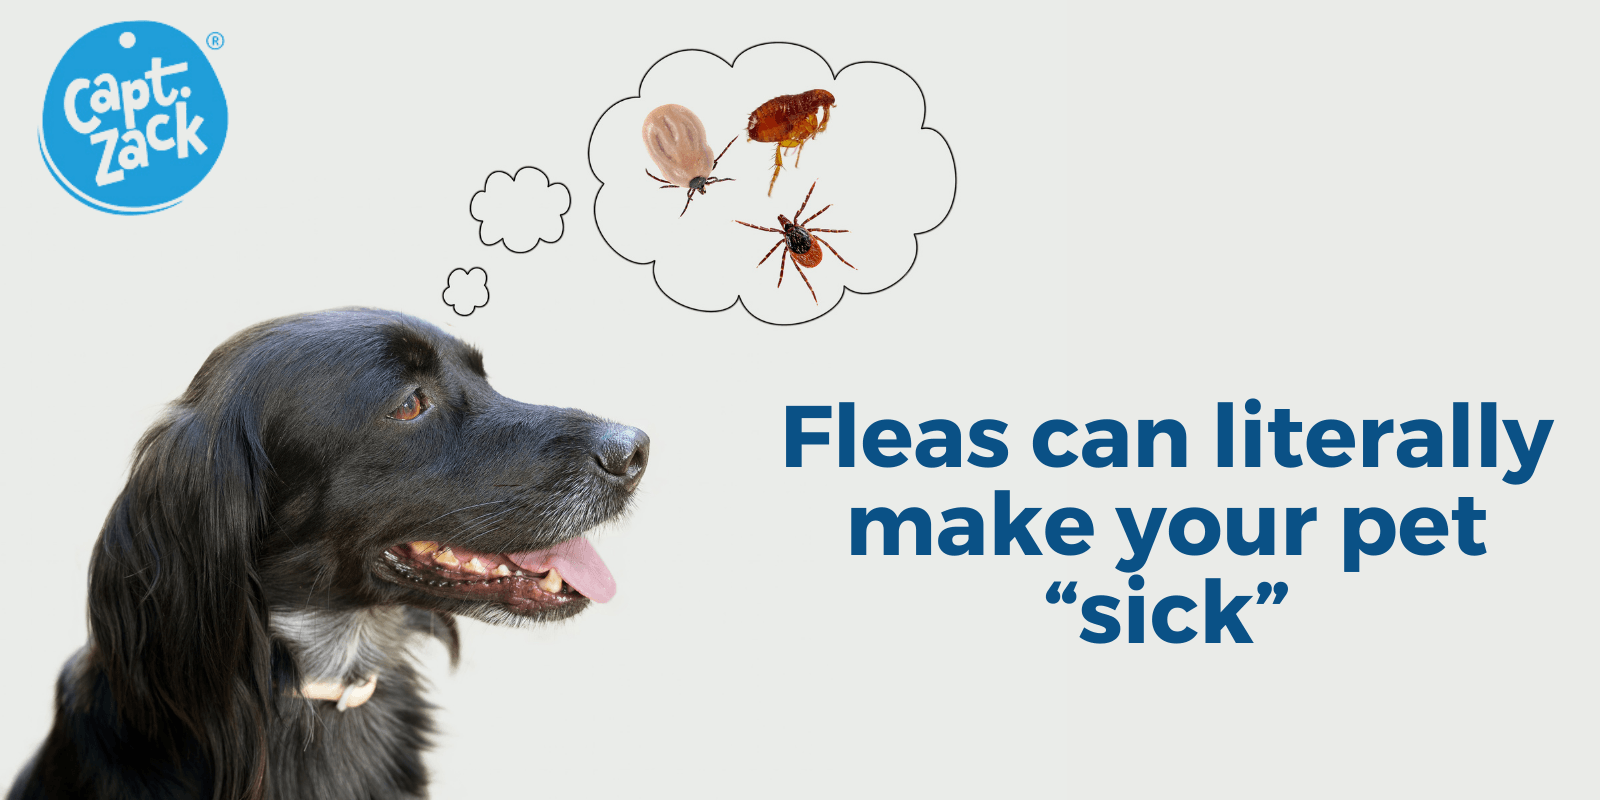 Fleas can literally make your pet “sick”